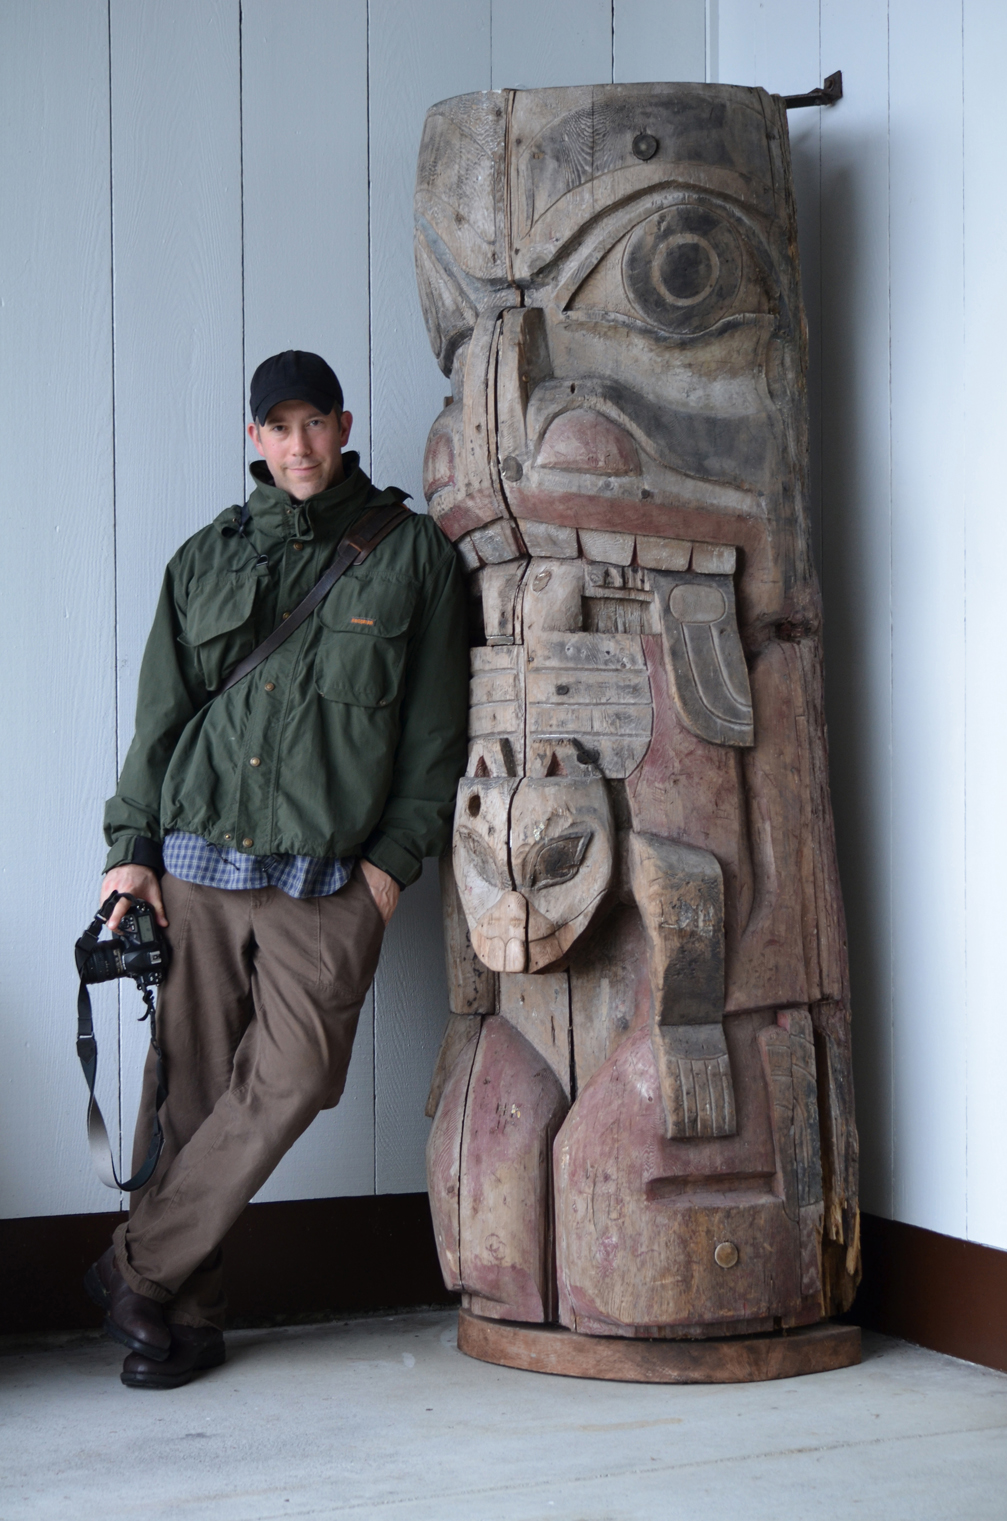 Chris Bernard stands beside a Haida totem pole at Sitka National Historical Park on visit to Alaska while researching his book. -Photo by Kim  Bernard